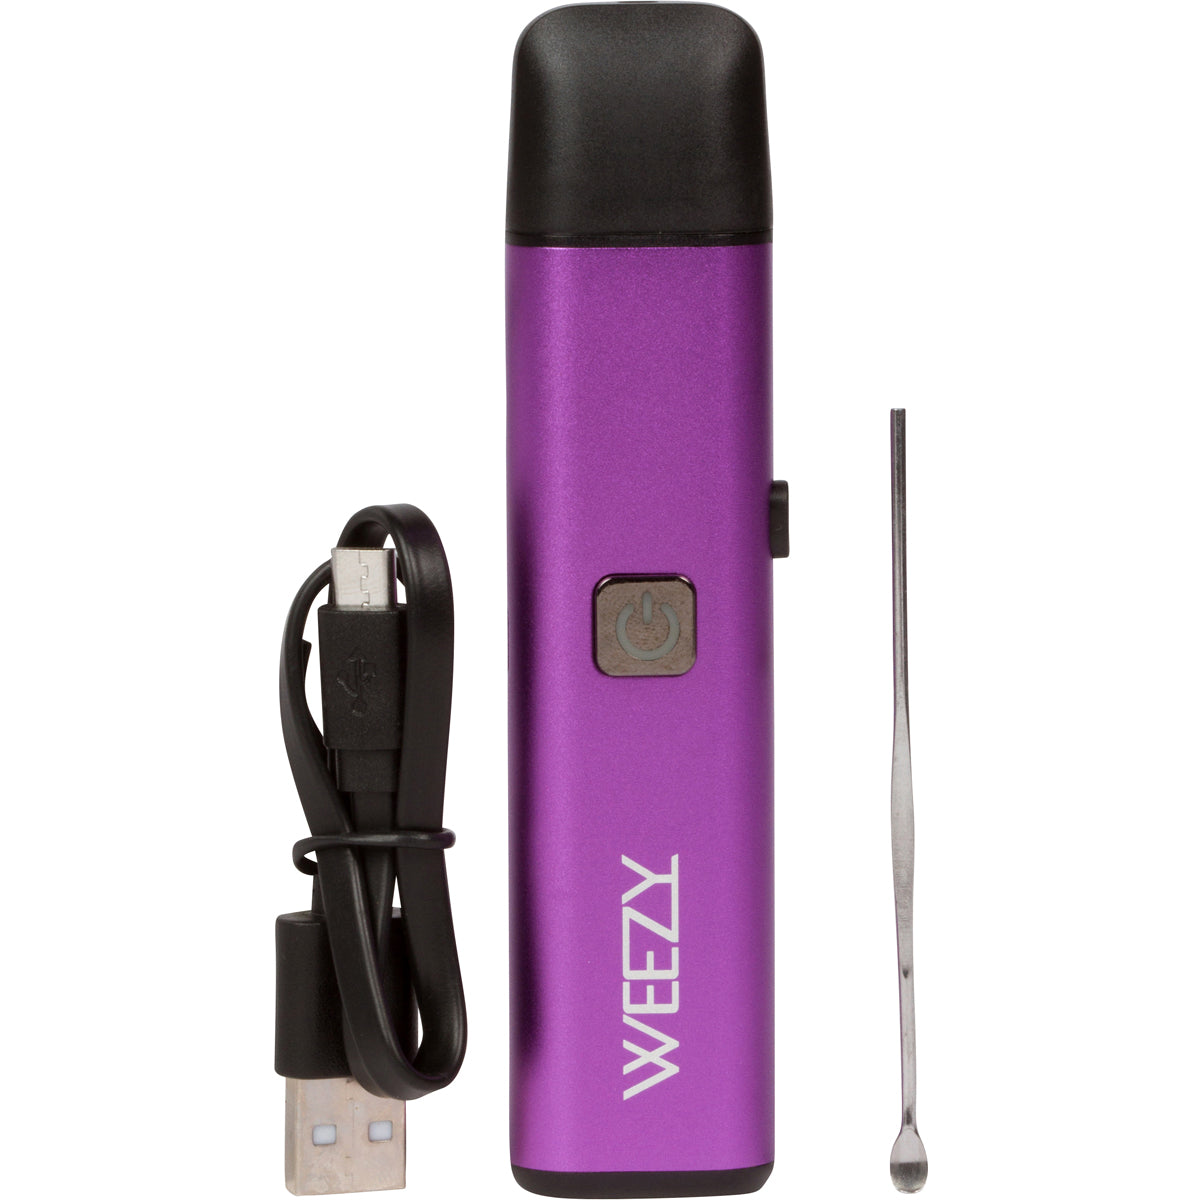 Kind Pen Weezy Concentrate Vaporizer with Ceramic Chamber